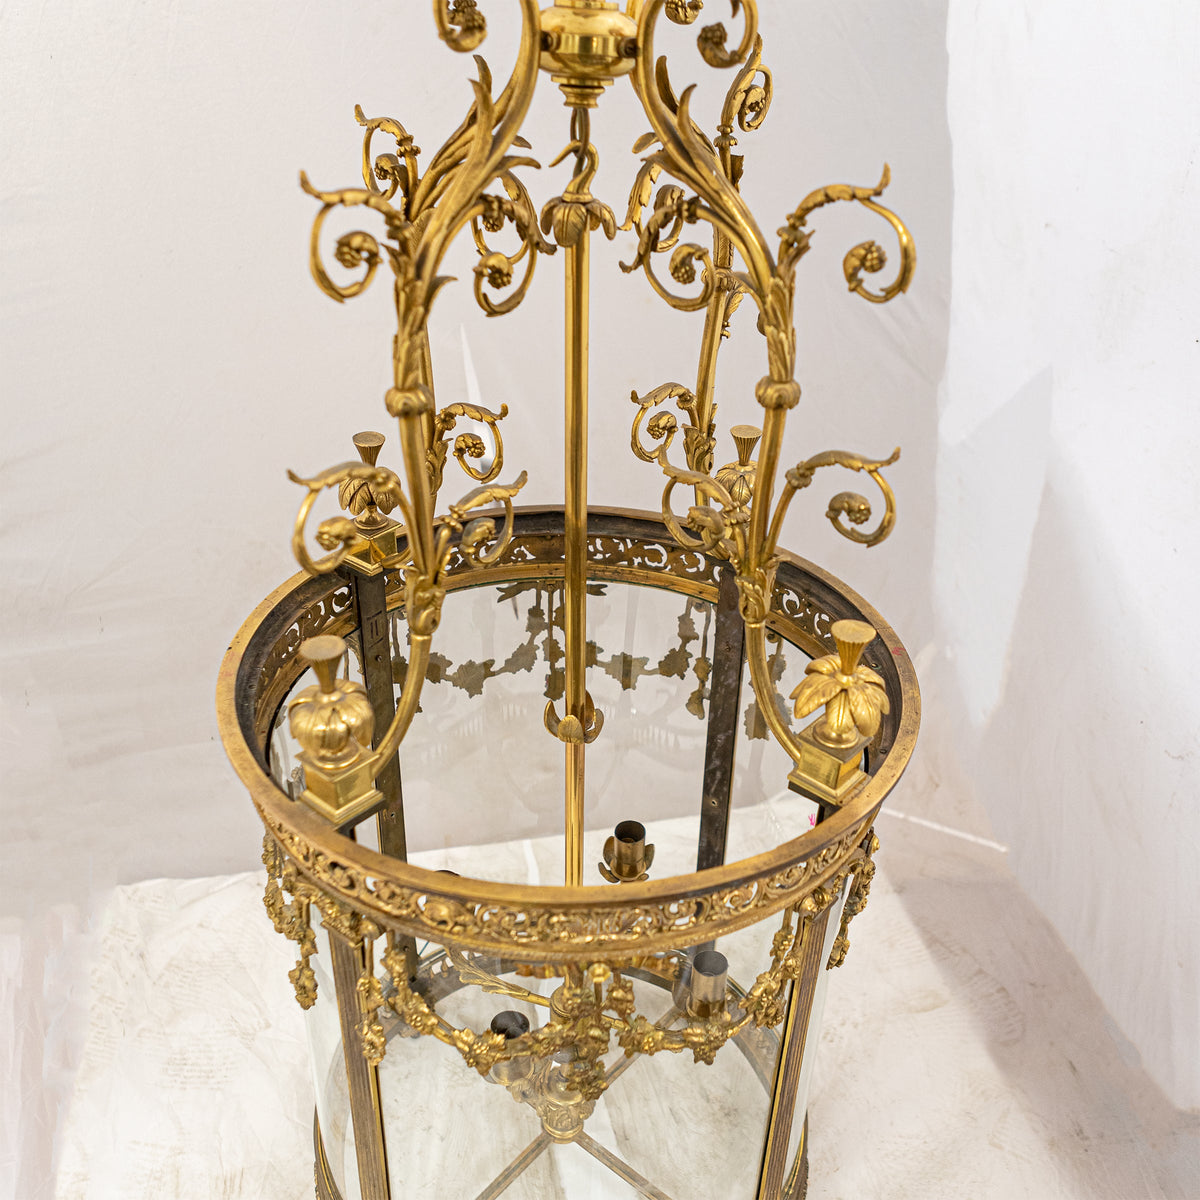 Reclaimed Antique Oversized Ornate French Brass Lantern | The Architectural Forum